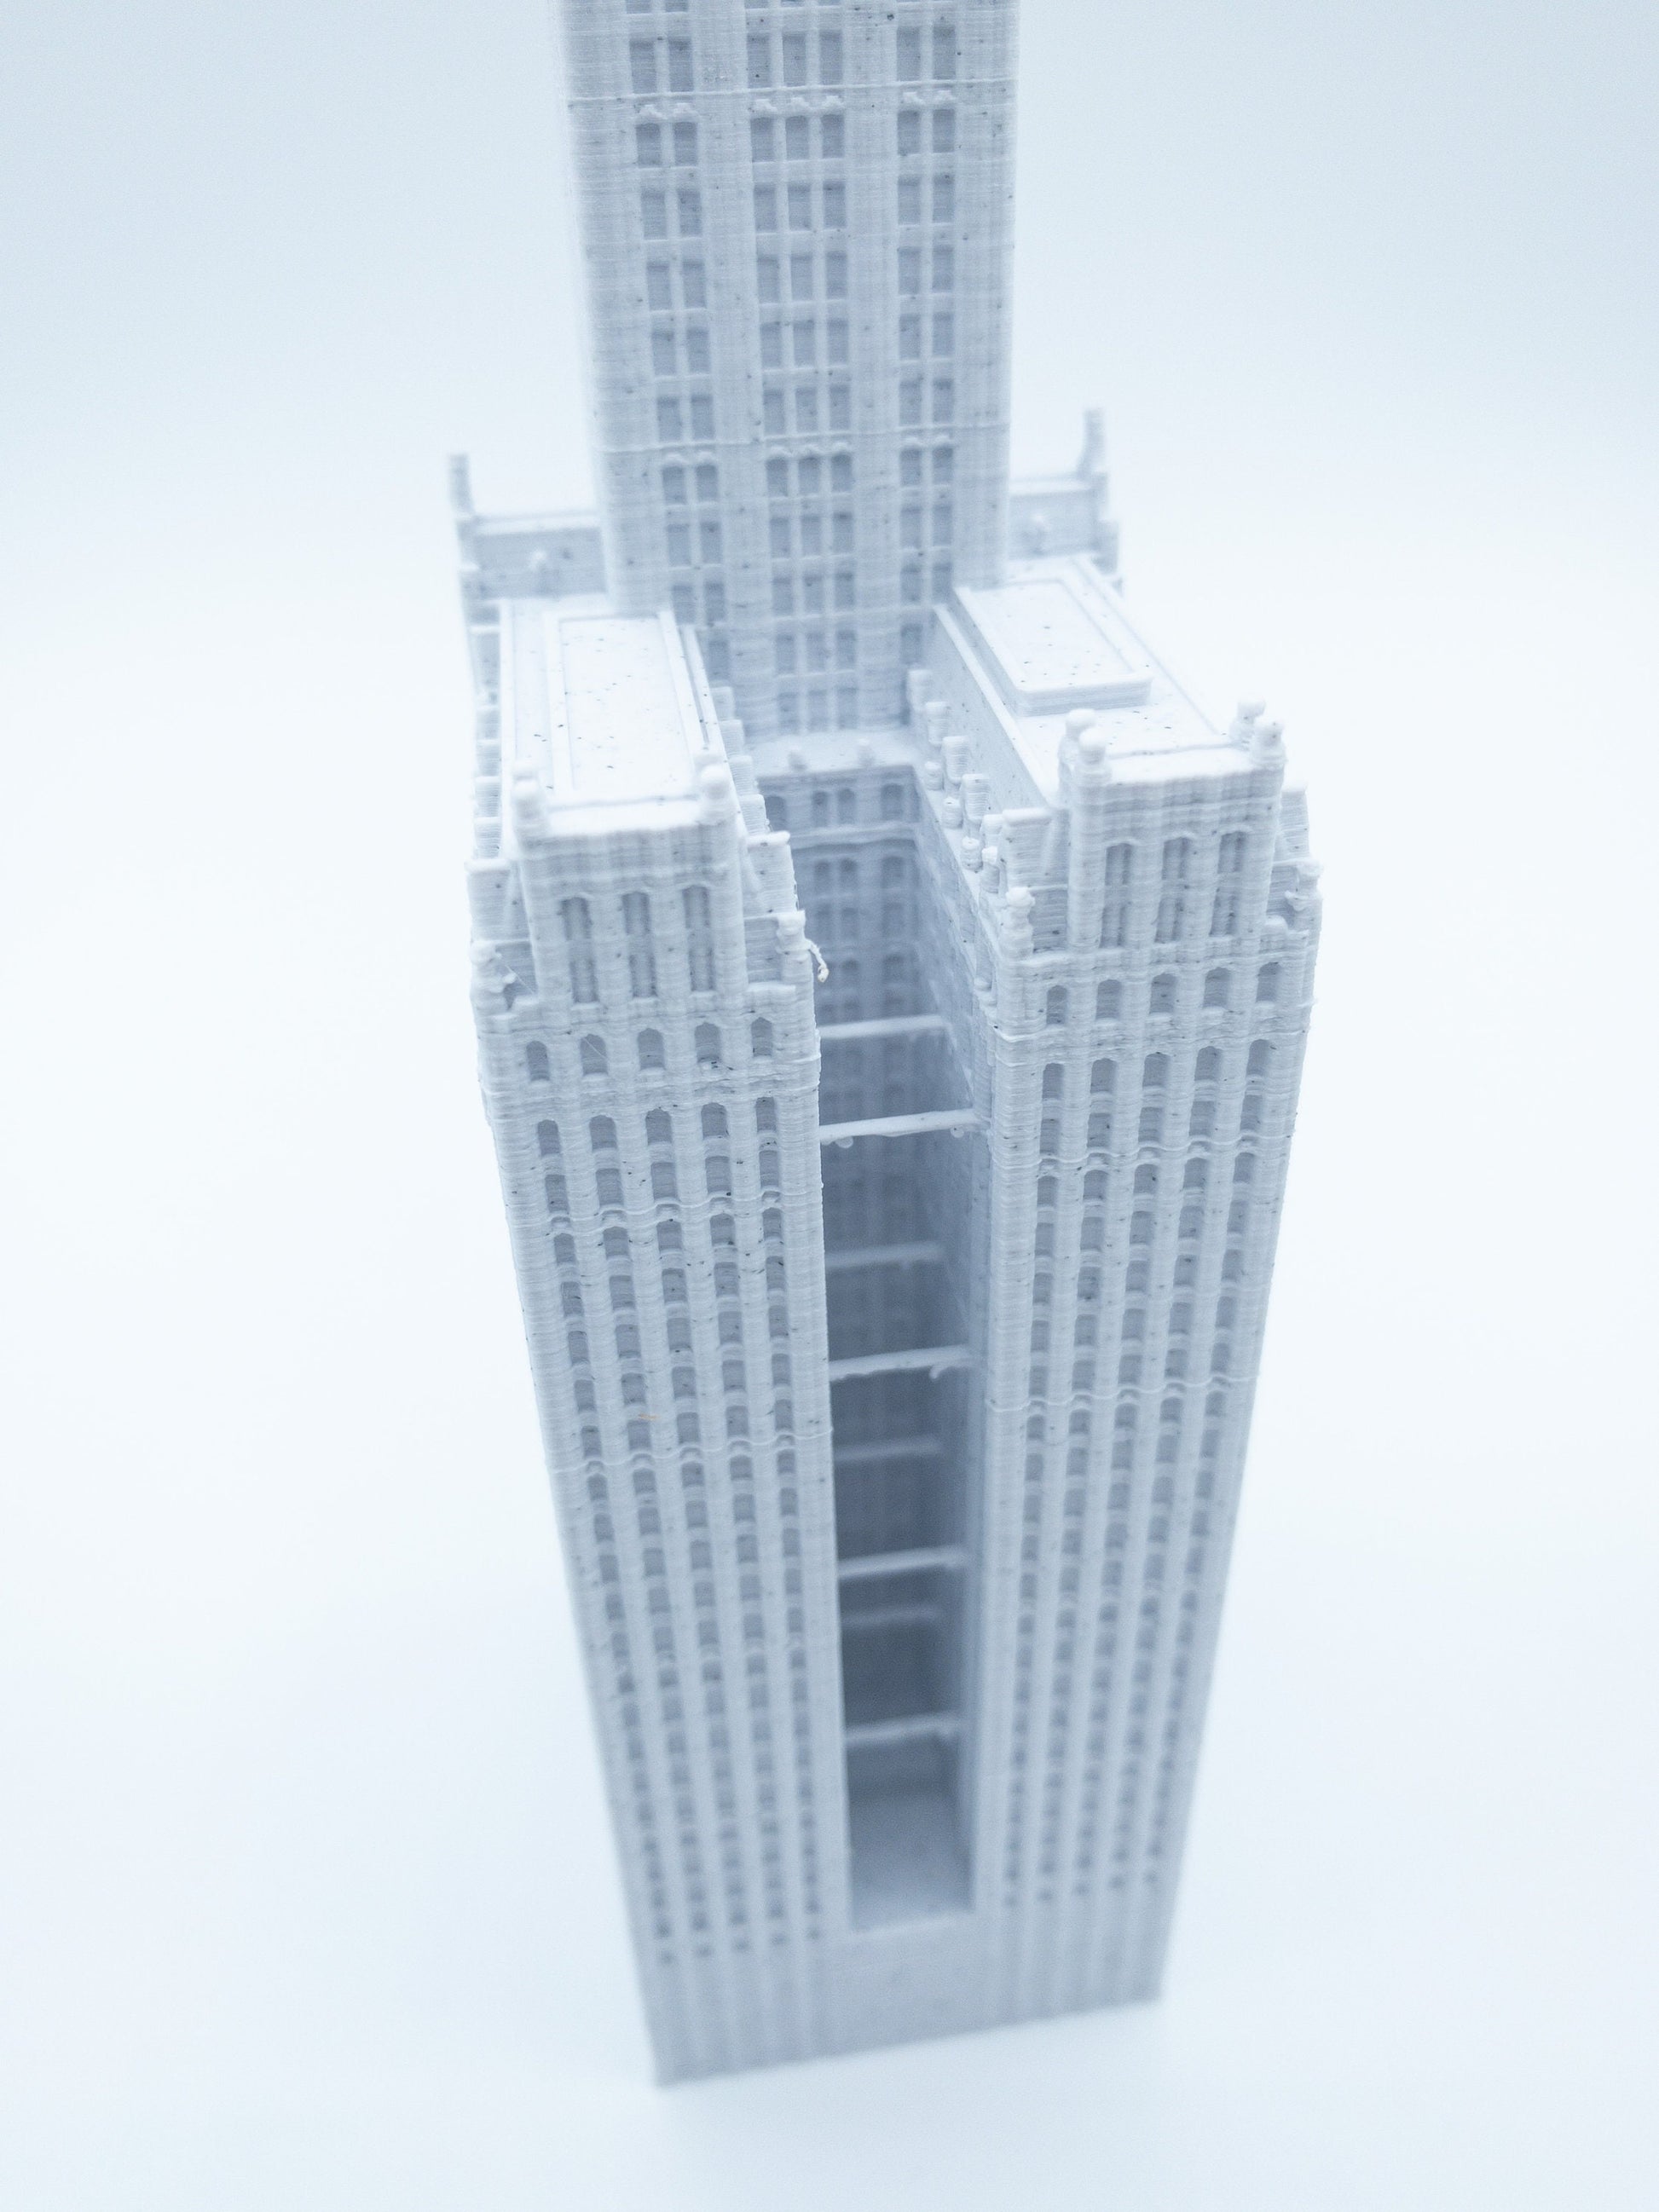 Woolworth Building Model- 3D Printed